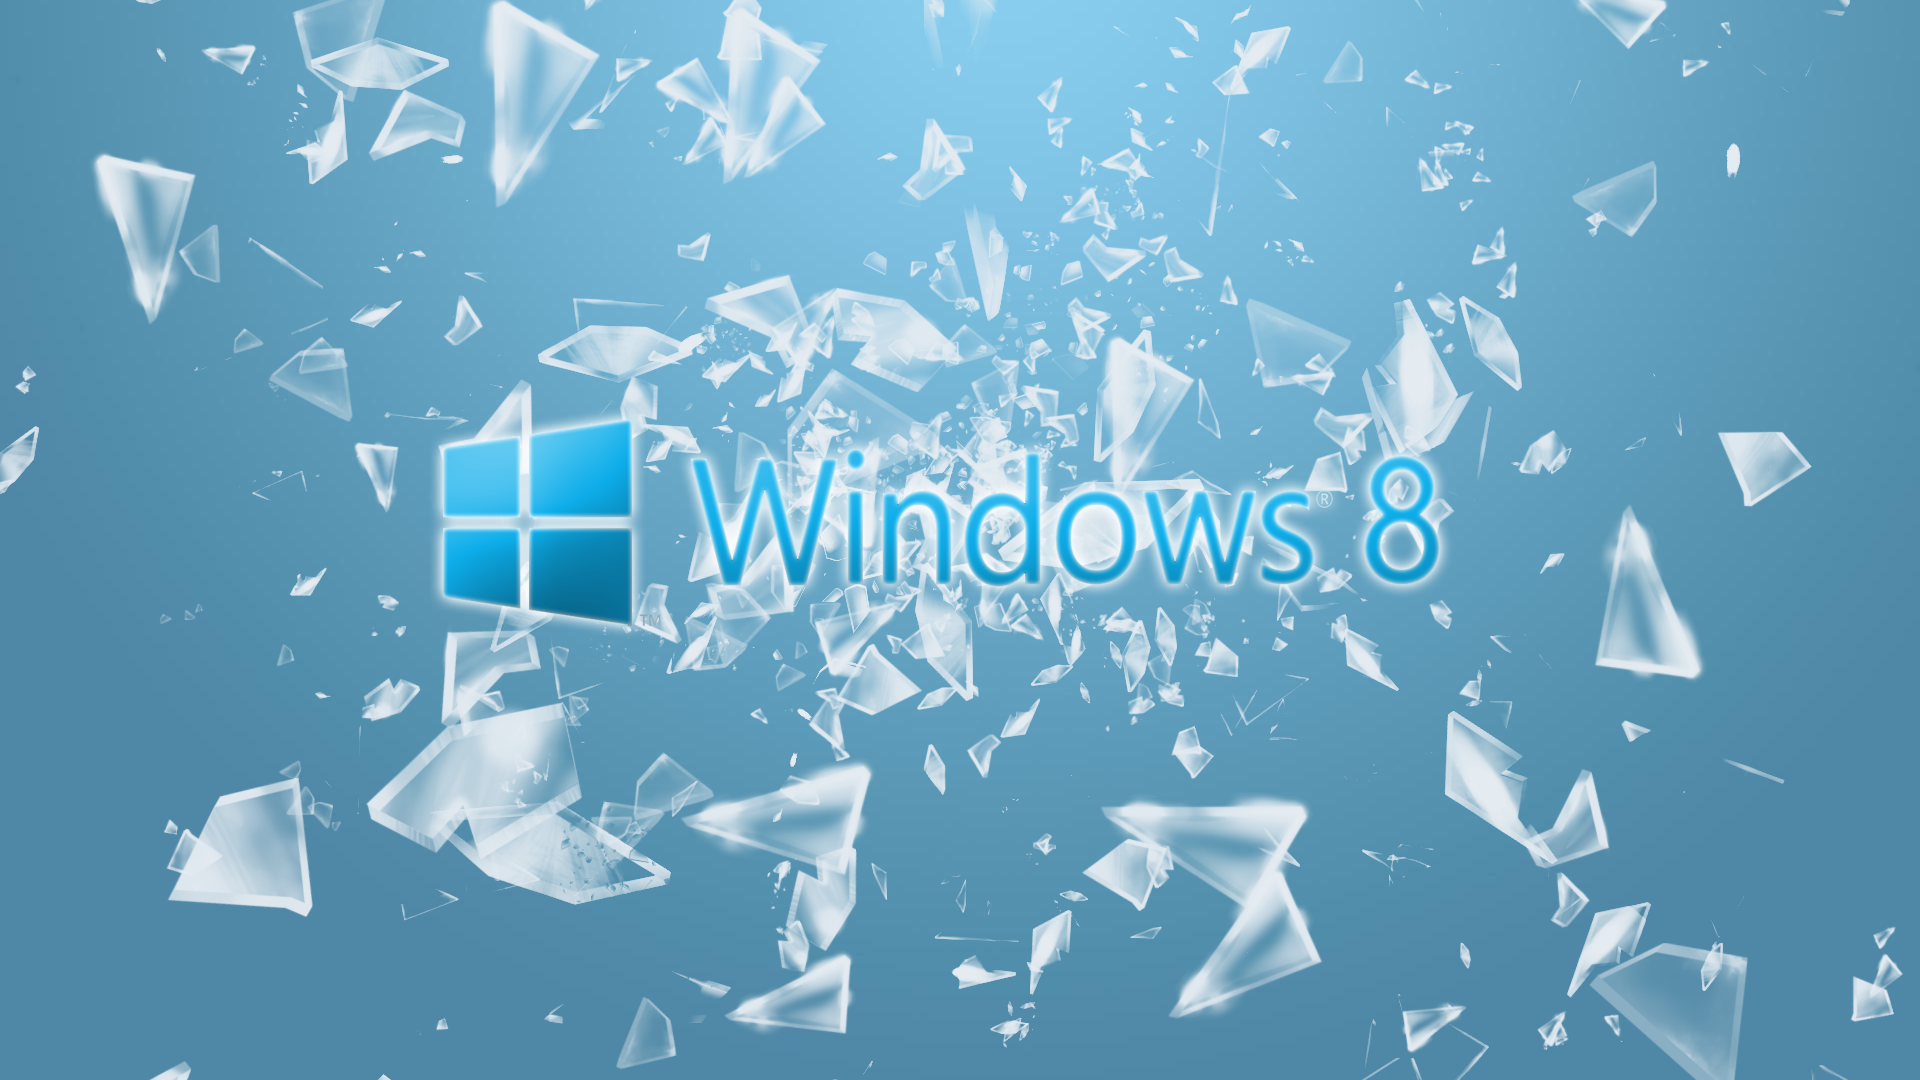 Windows 8 HD Wallpapers | Windows 8 Images Free | Cool Wallpapers